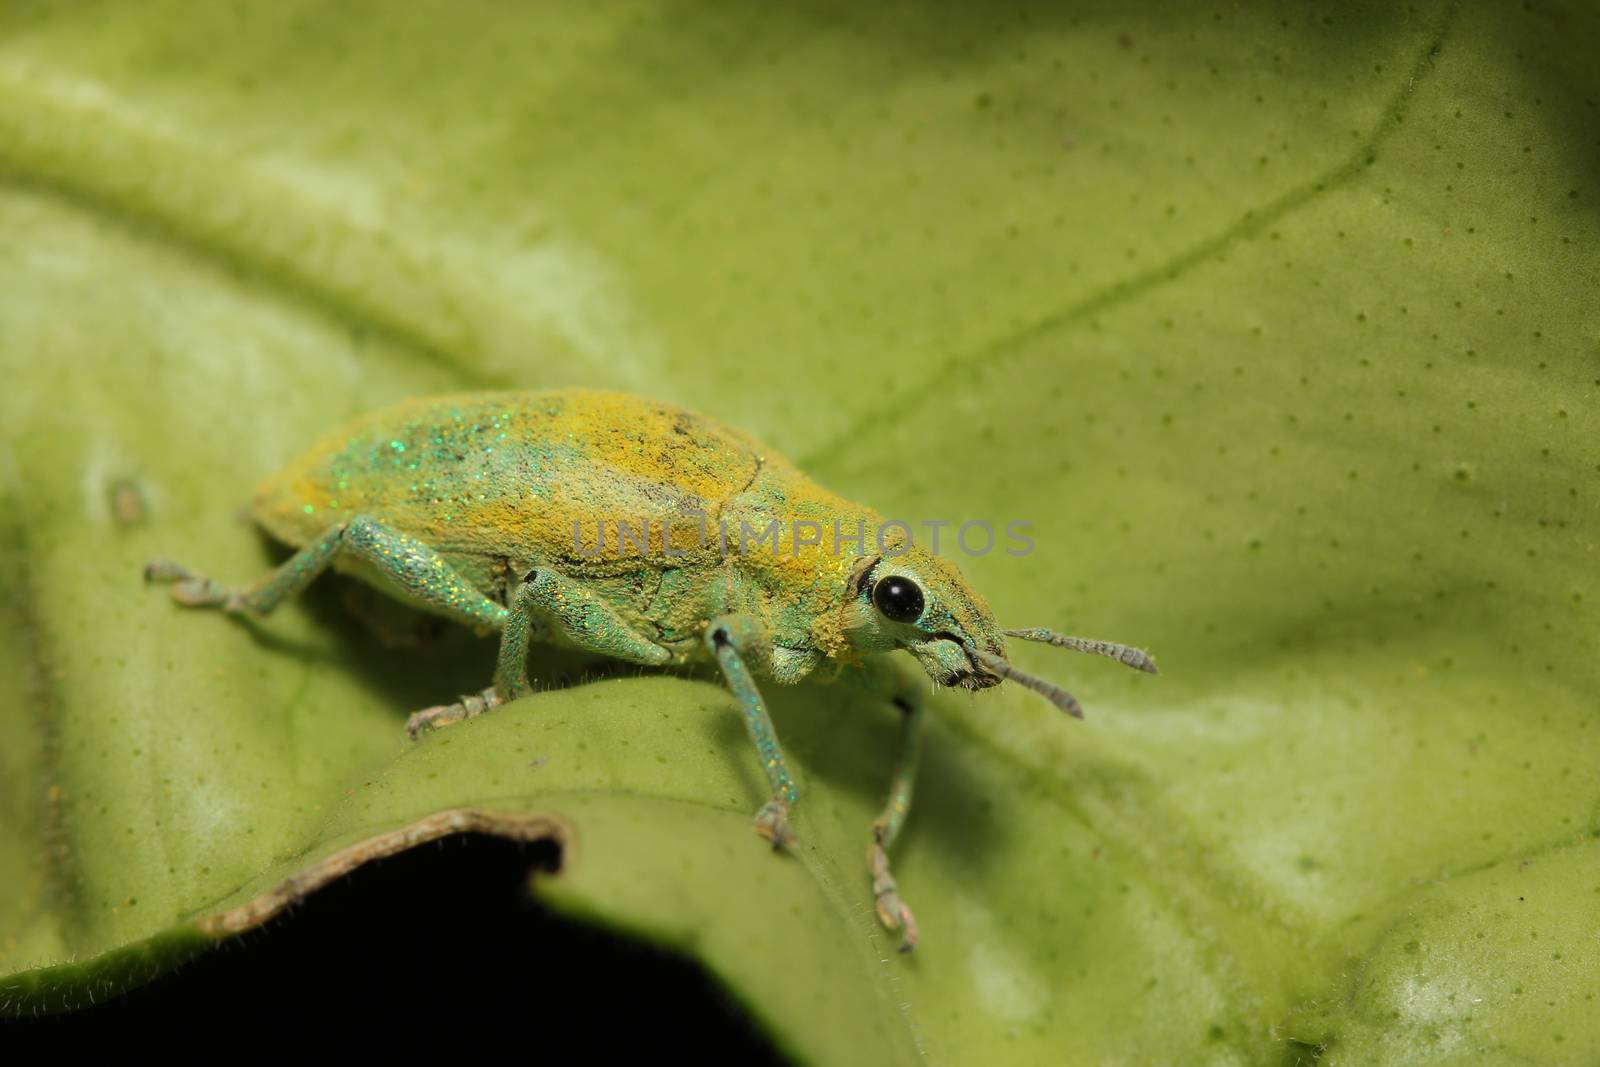 close up green weevil on leaf in garden